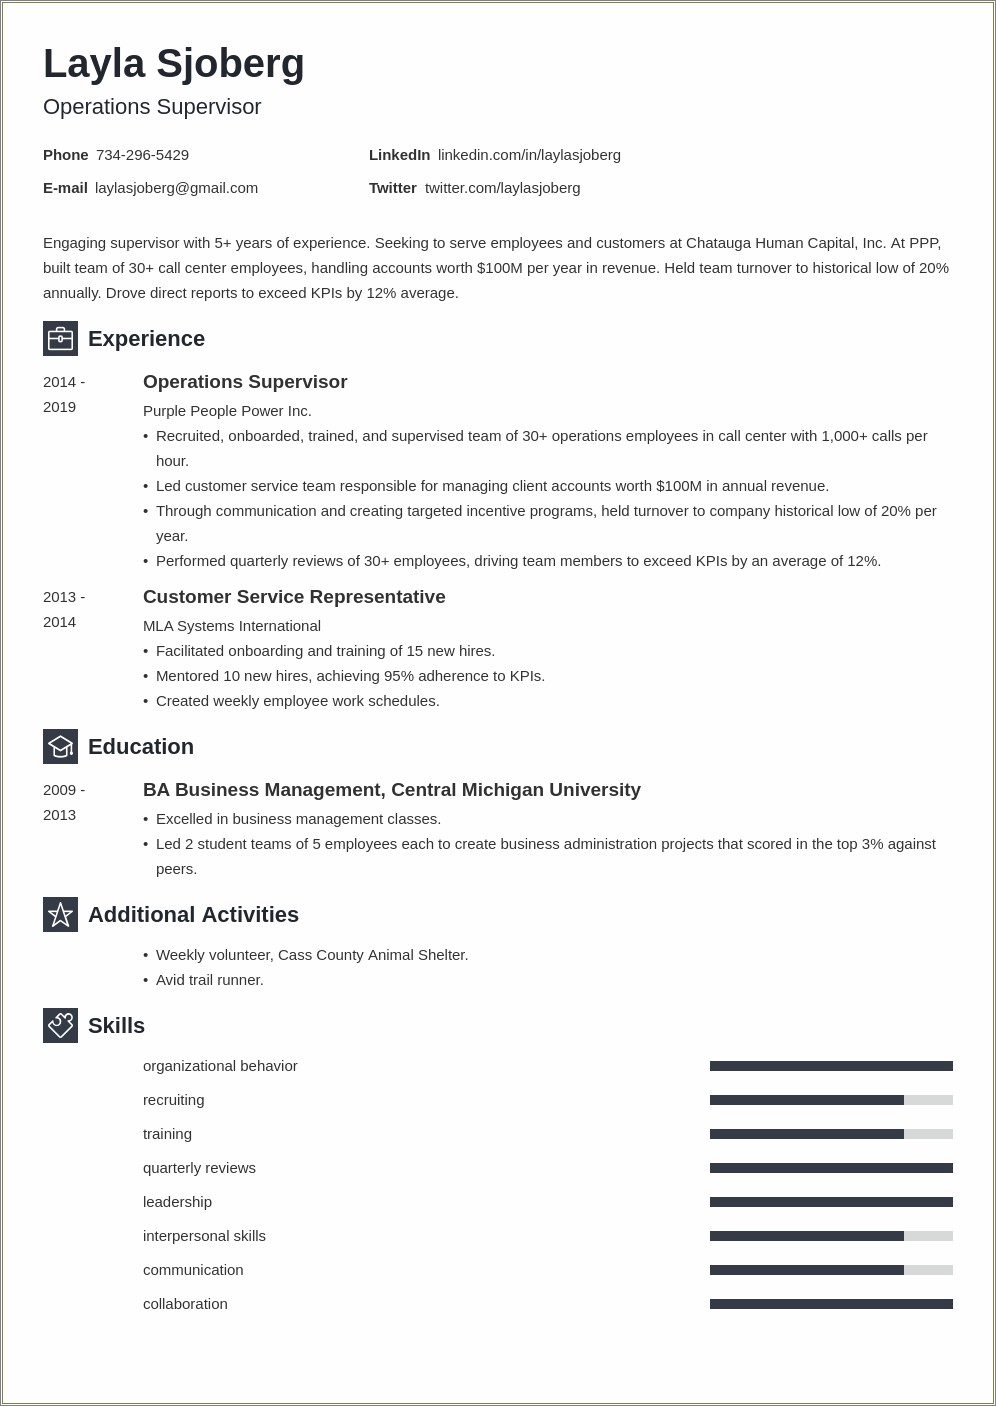 Resume For Operations Manager Over 50